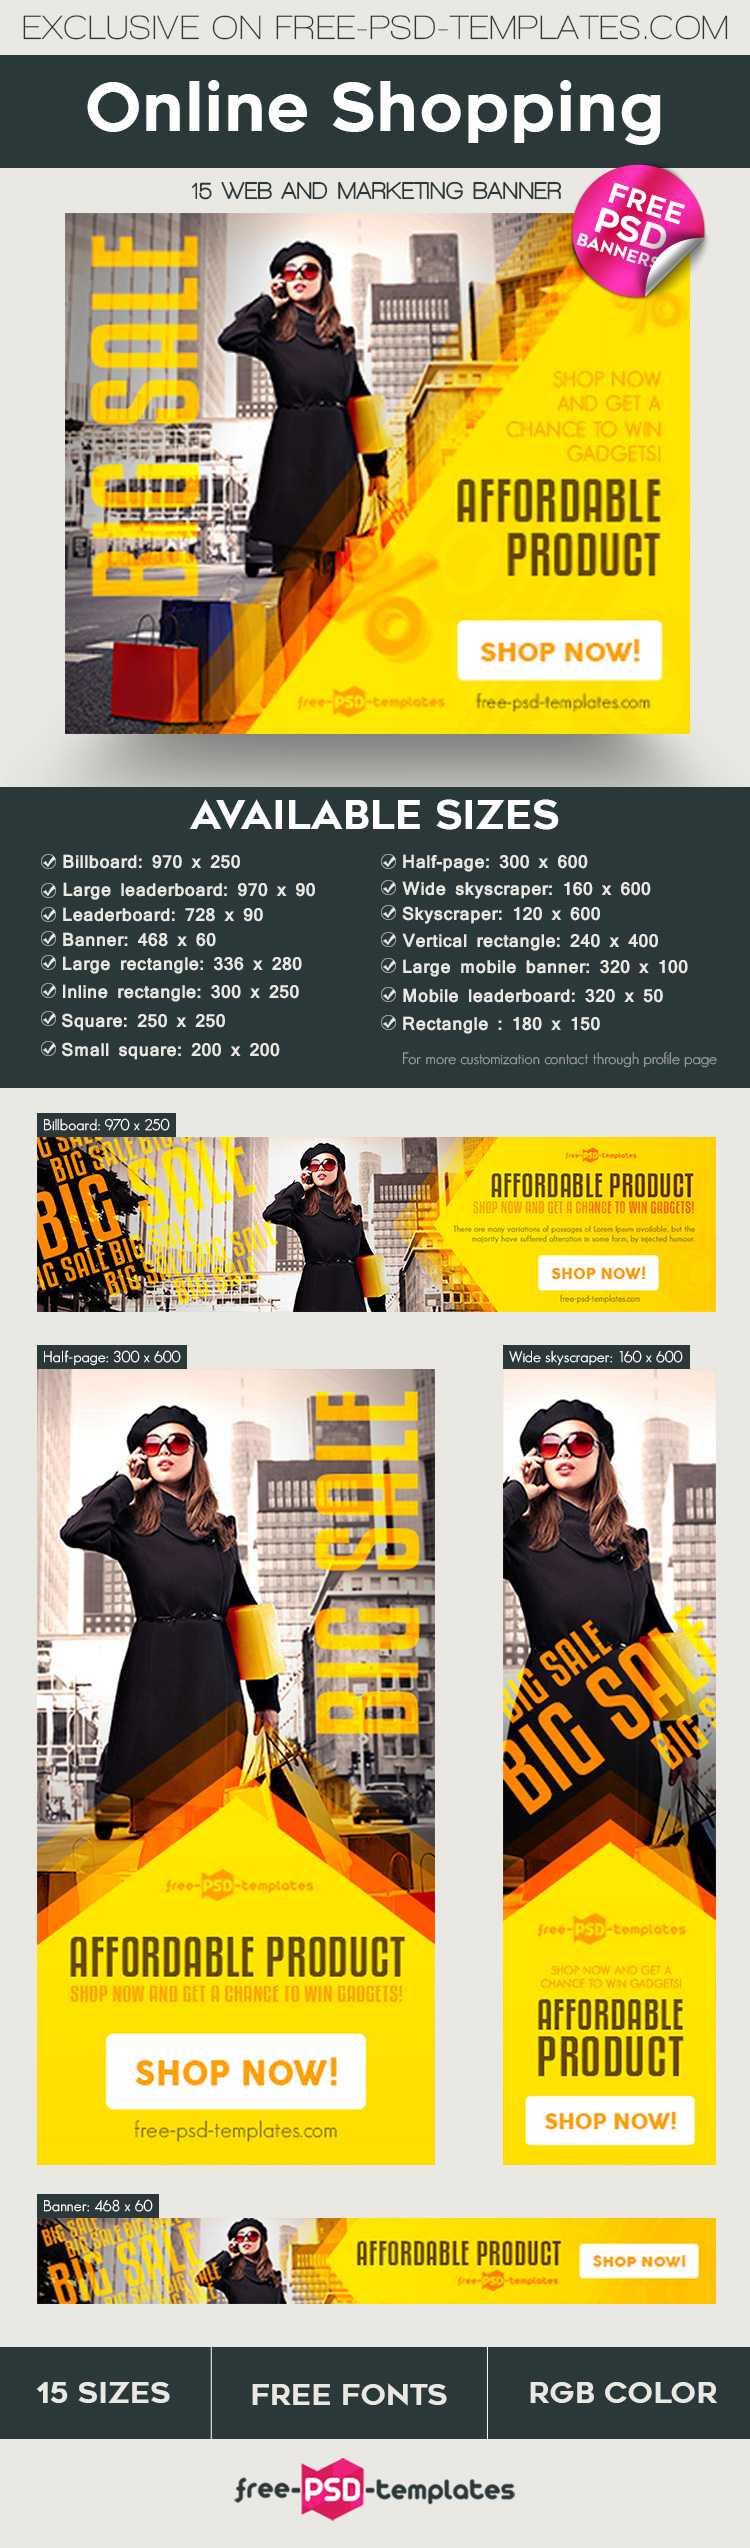 15 Free Online Shopping Banner In Psd On Behance With Free Online Banner Templates